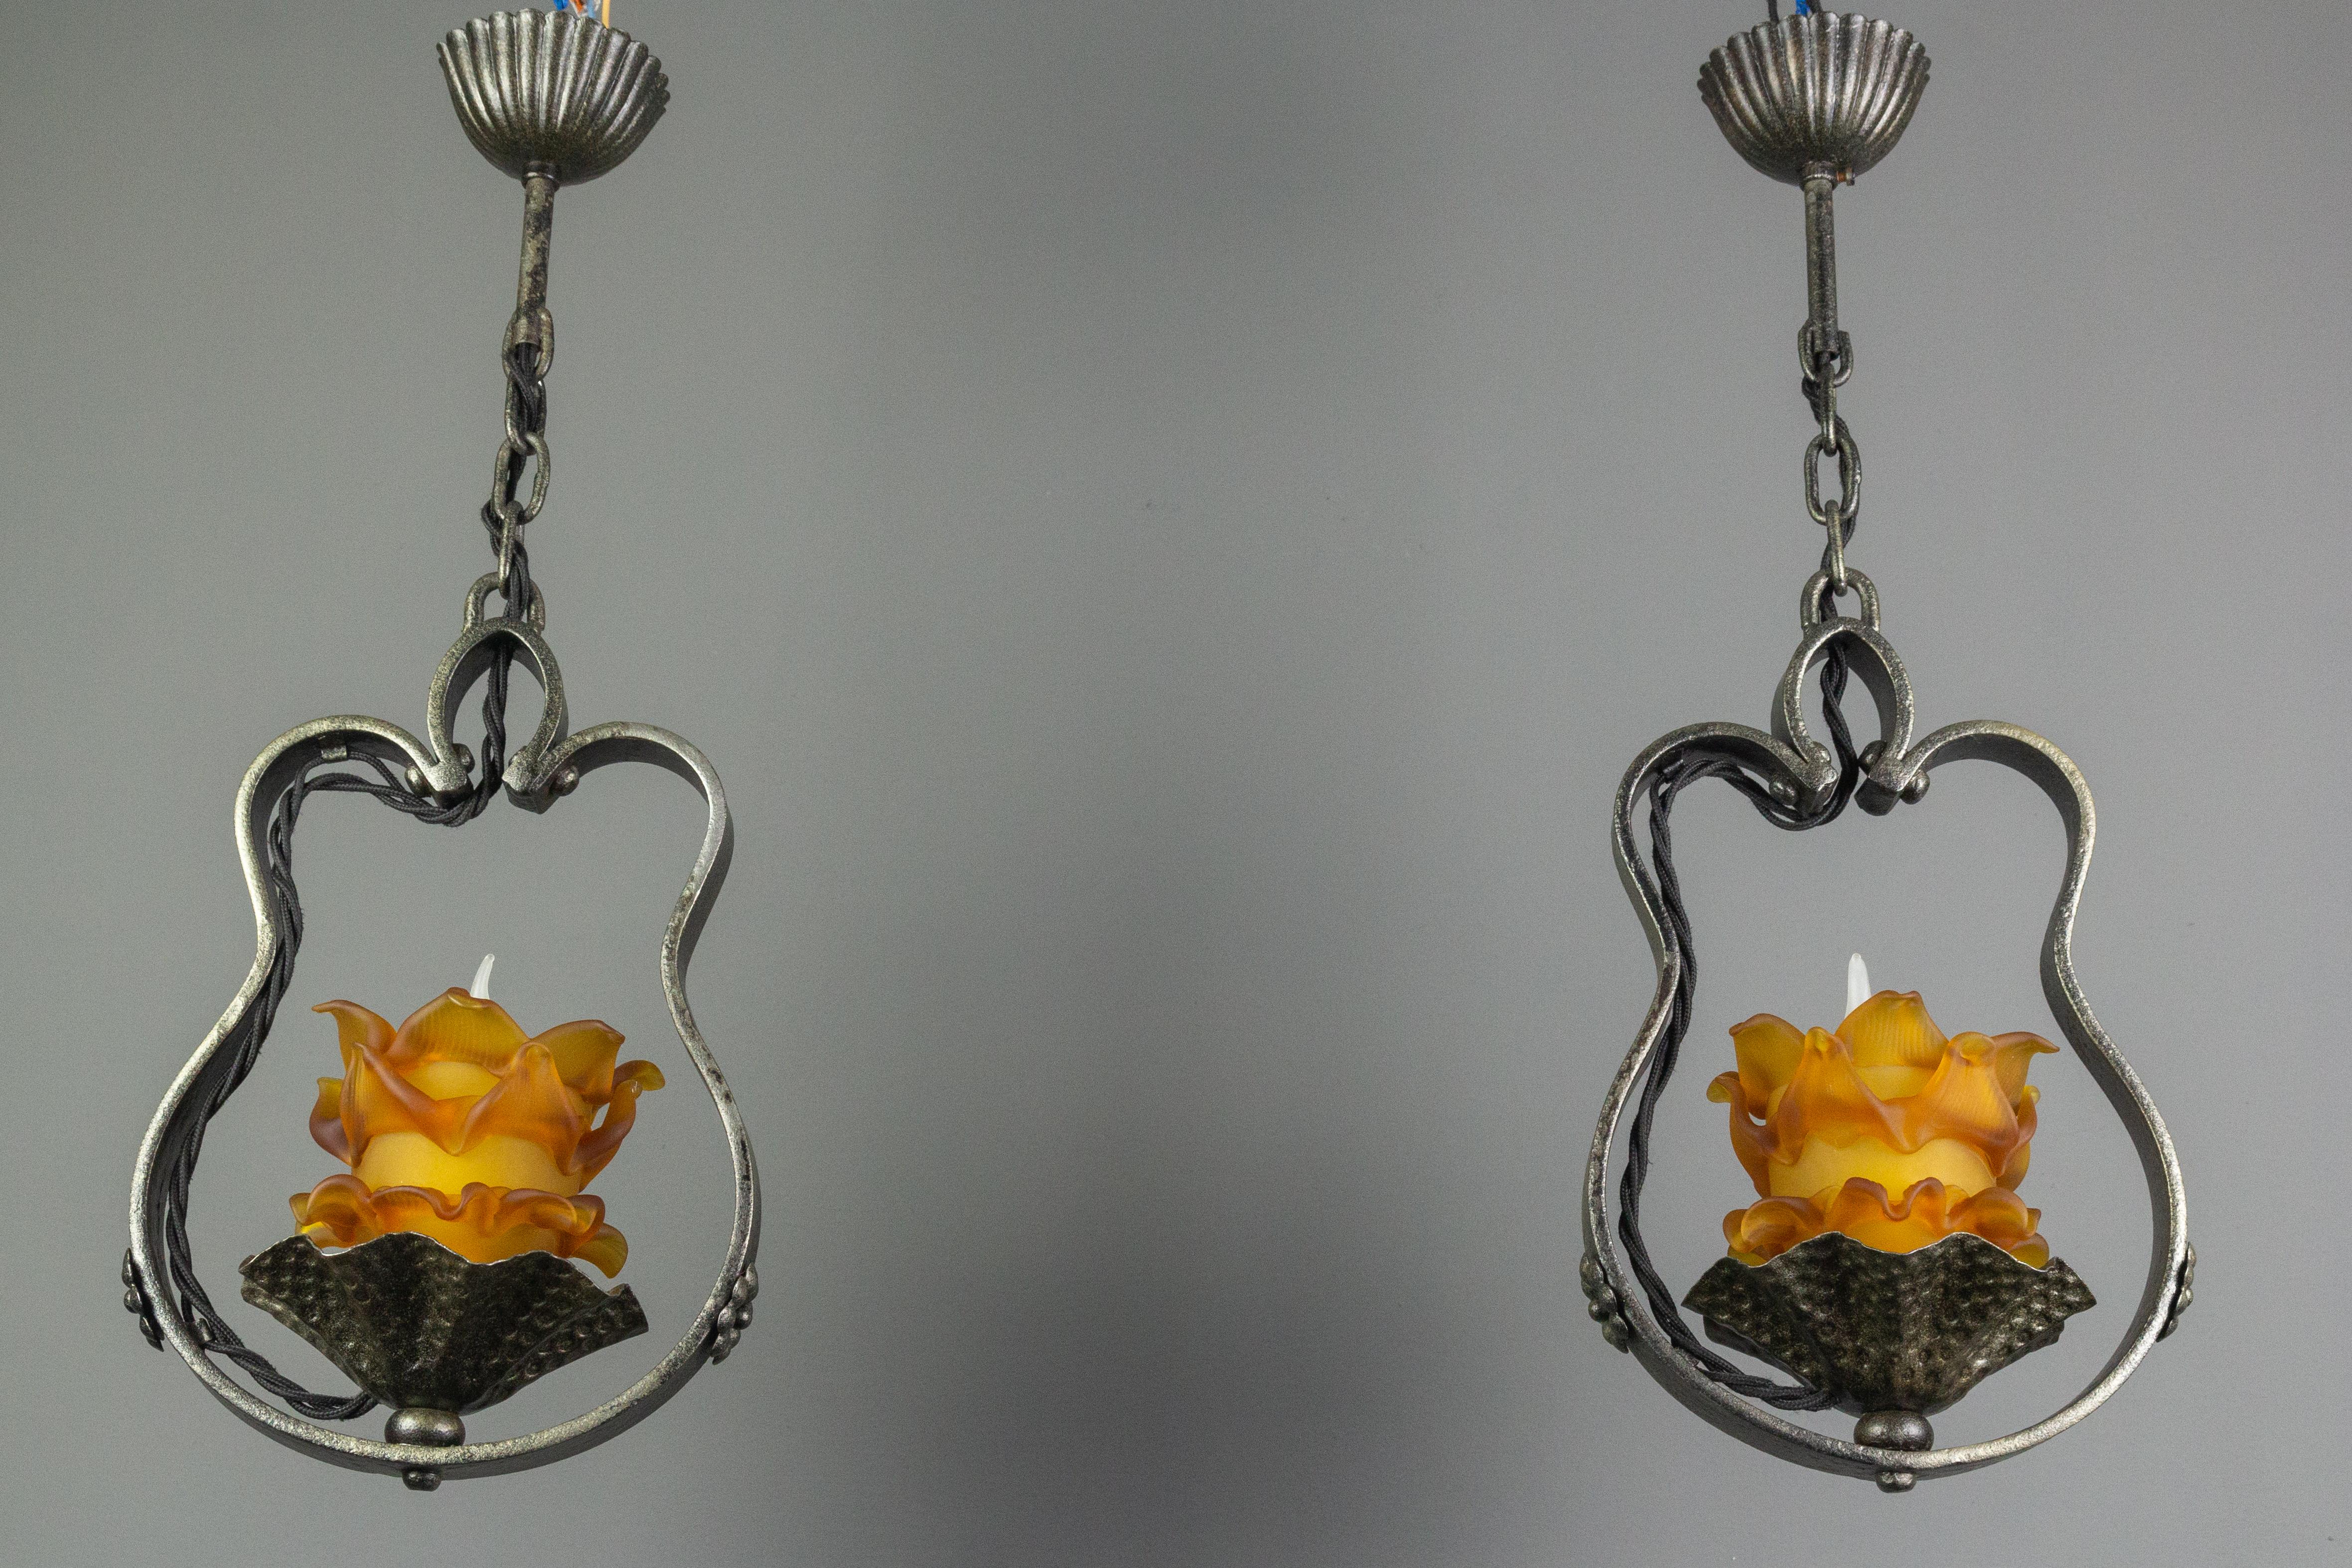 French Provincial Pair of French Wrought Iron and Orange Glass Flower Shaped Pendant Lights